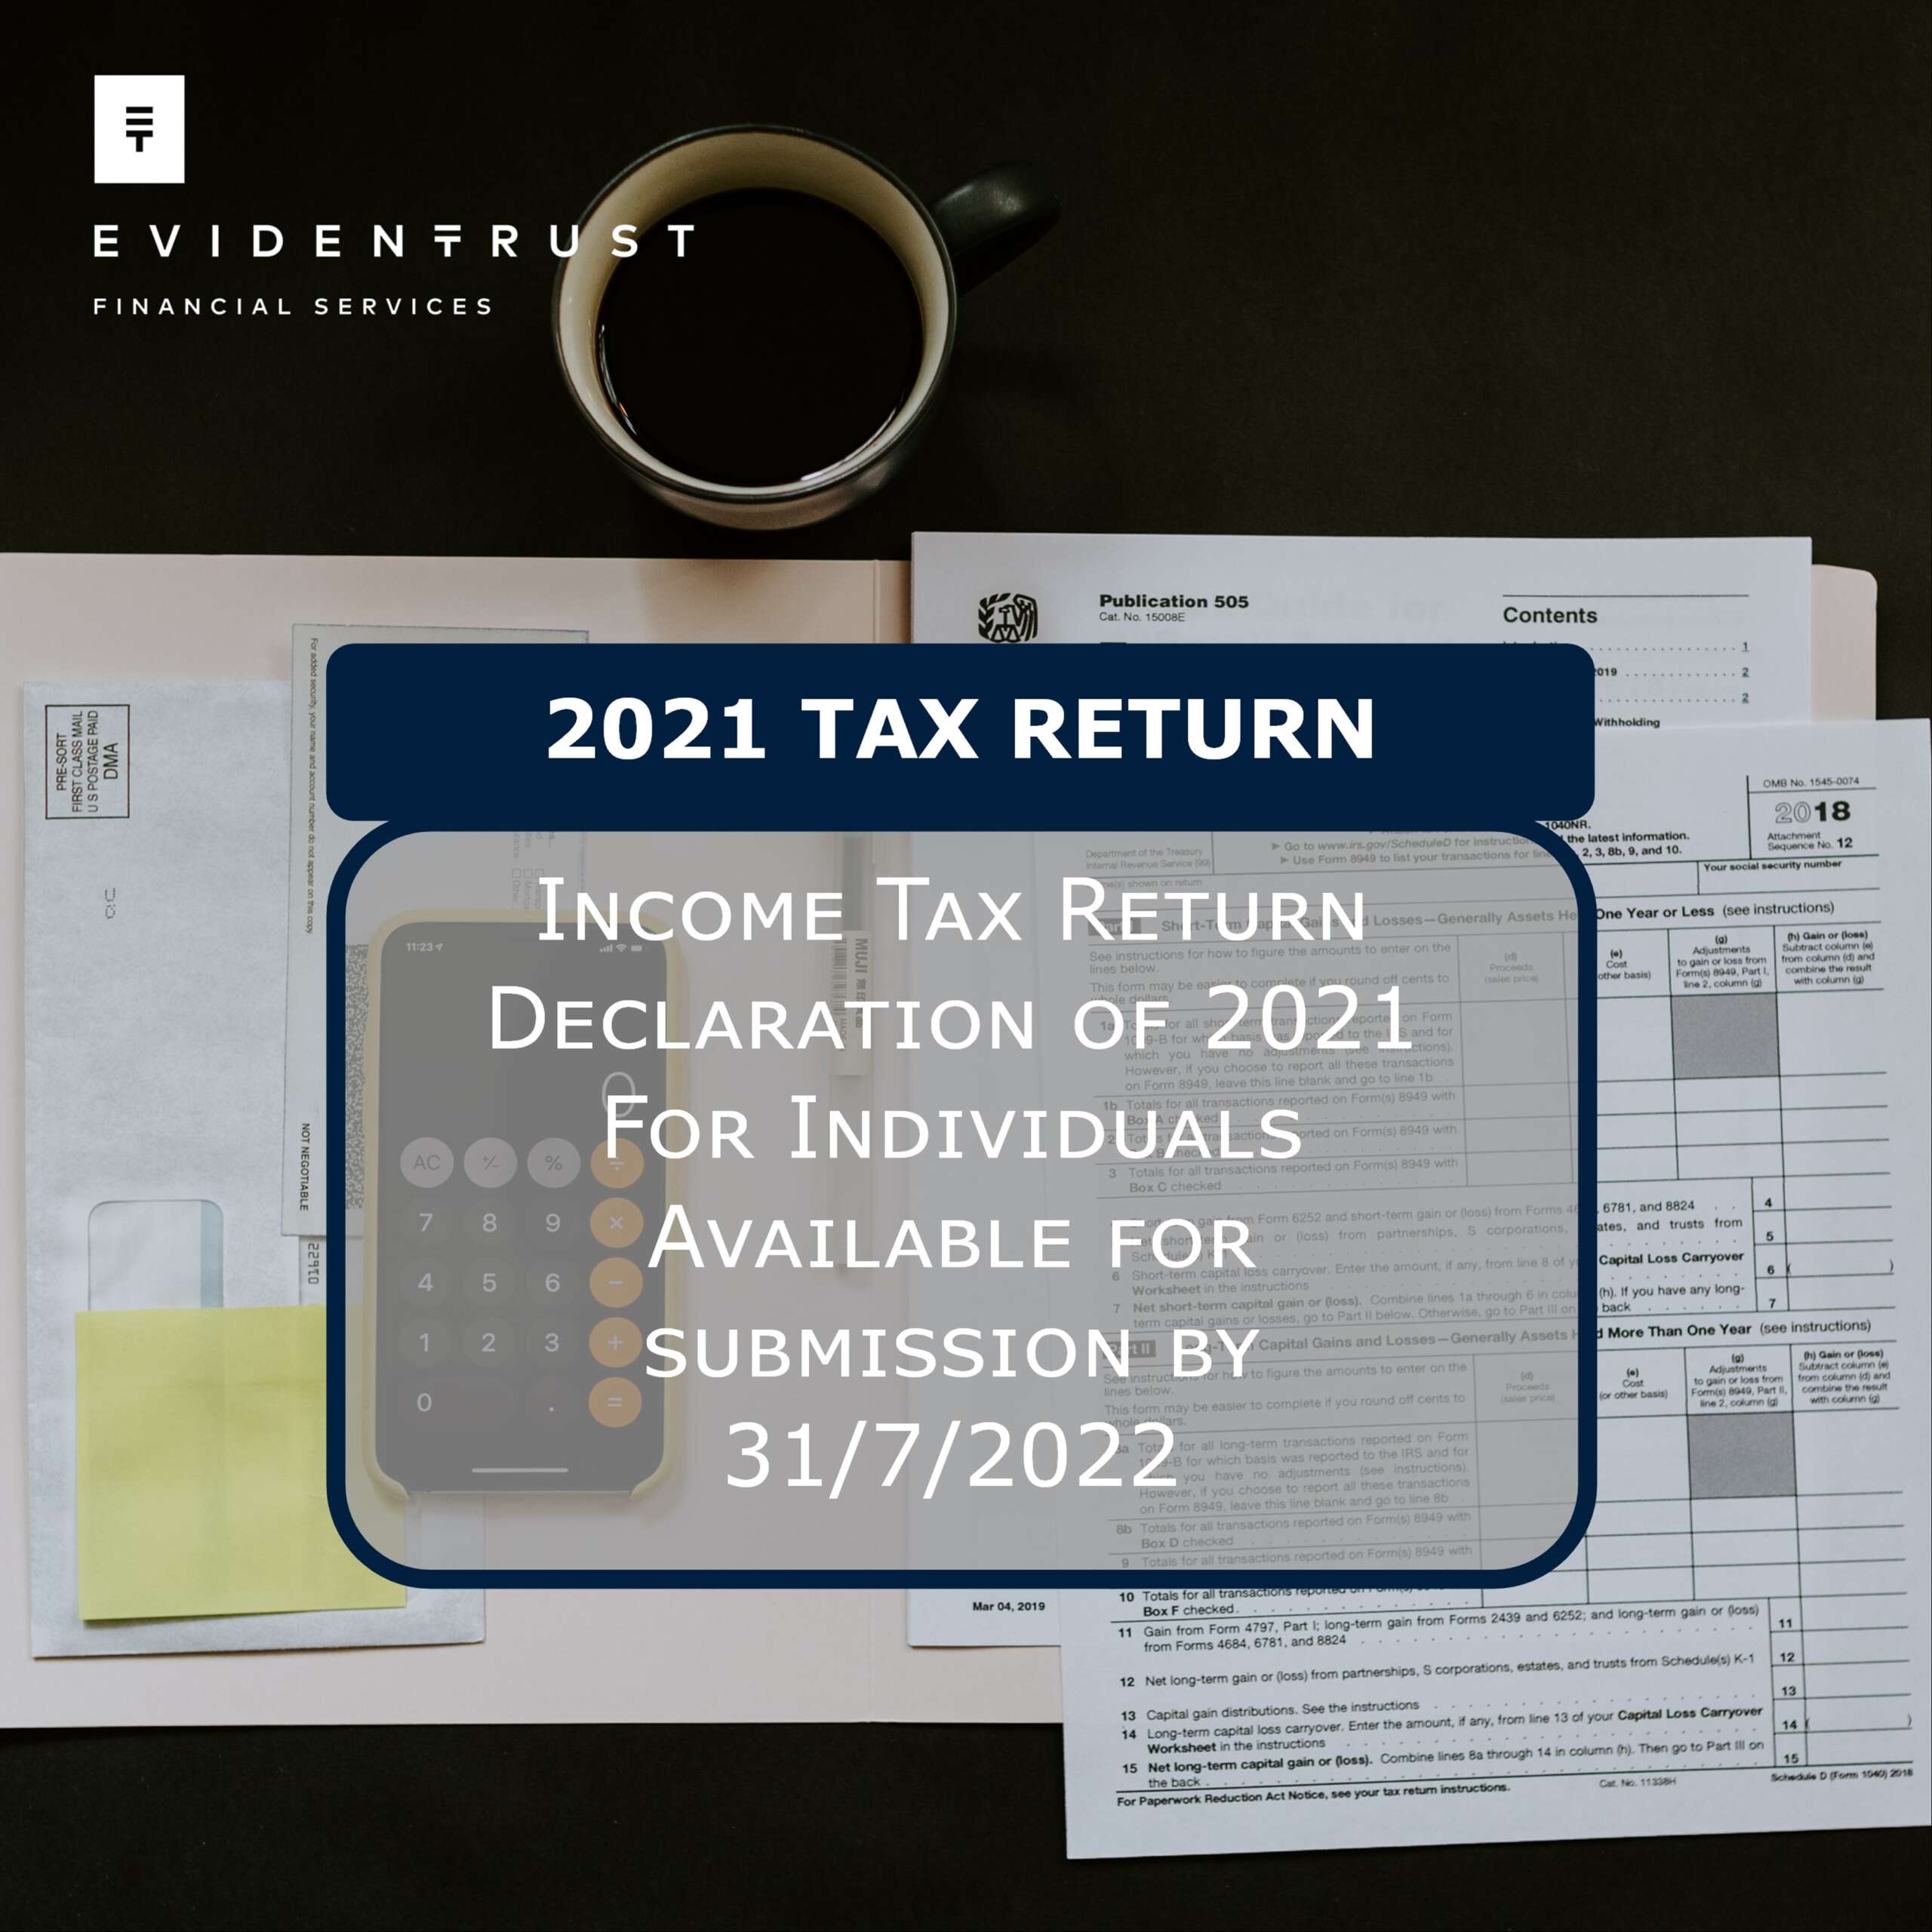 Income Tax Return Declaration for Individuals for 2021